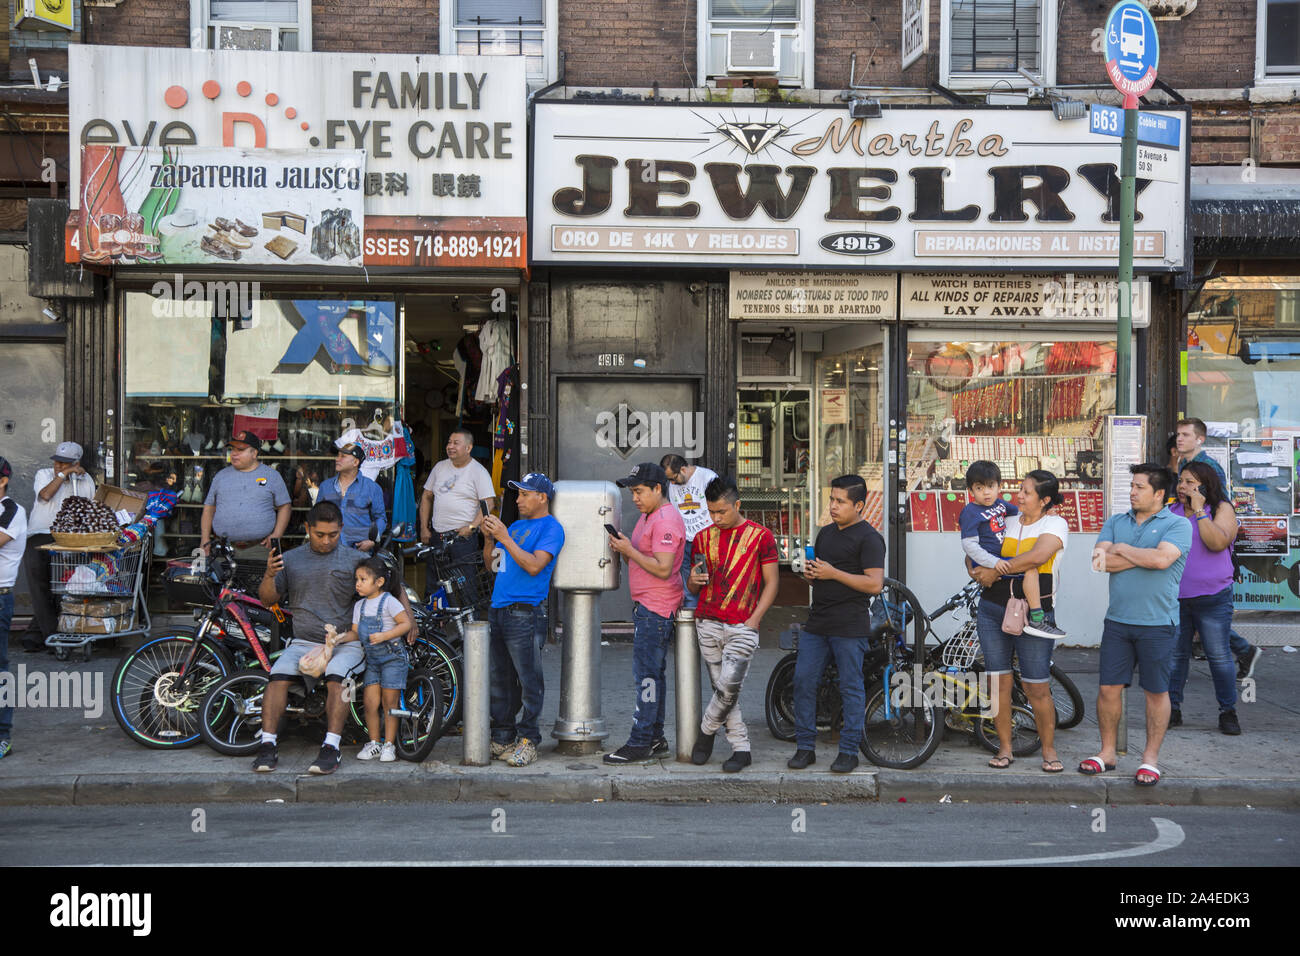 The Mexican Independence Day Parade in Sunset Park, Brooklyn, NY, a neighborhood with a large Mexican and Hispanic population from other Latin American countries. Mostly young spectators with phones out waiting to record the parade as it passes by. Stock Photo